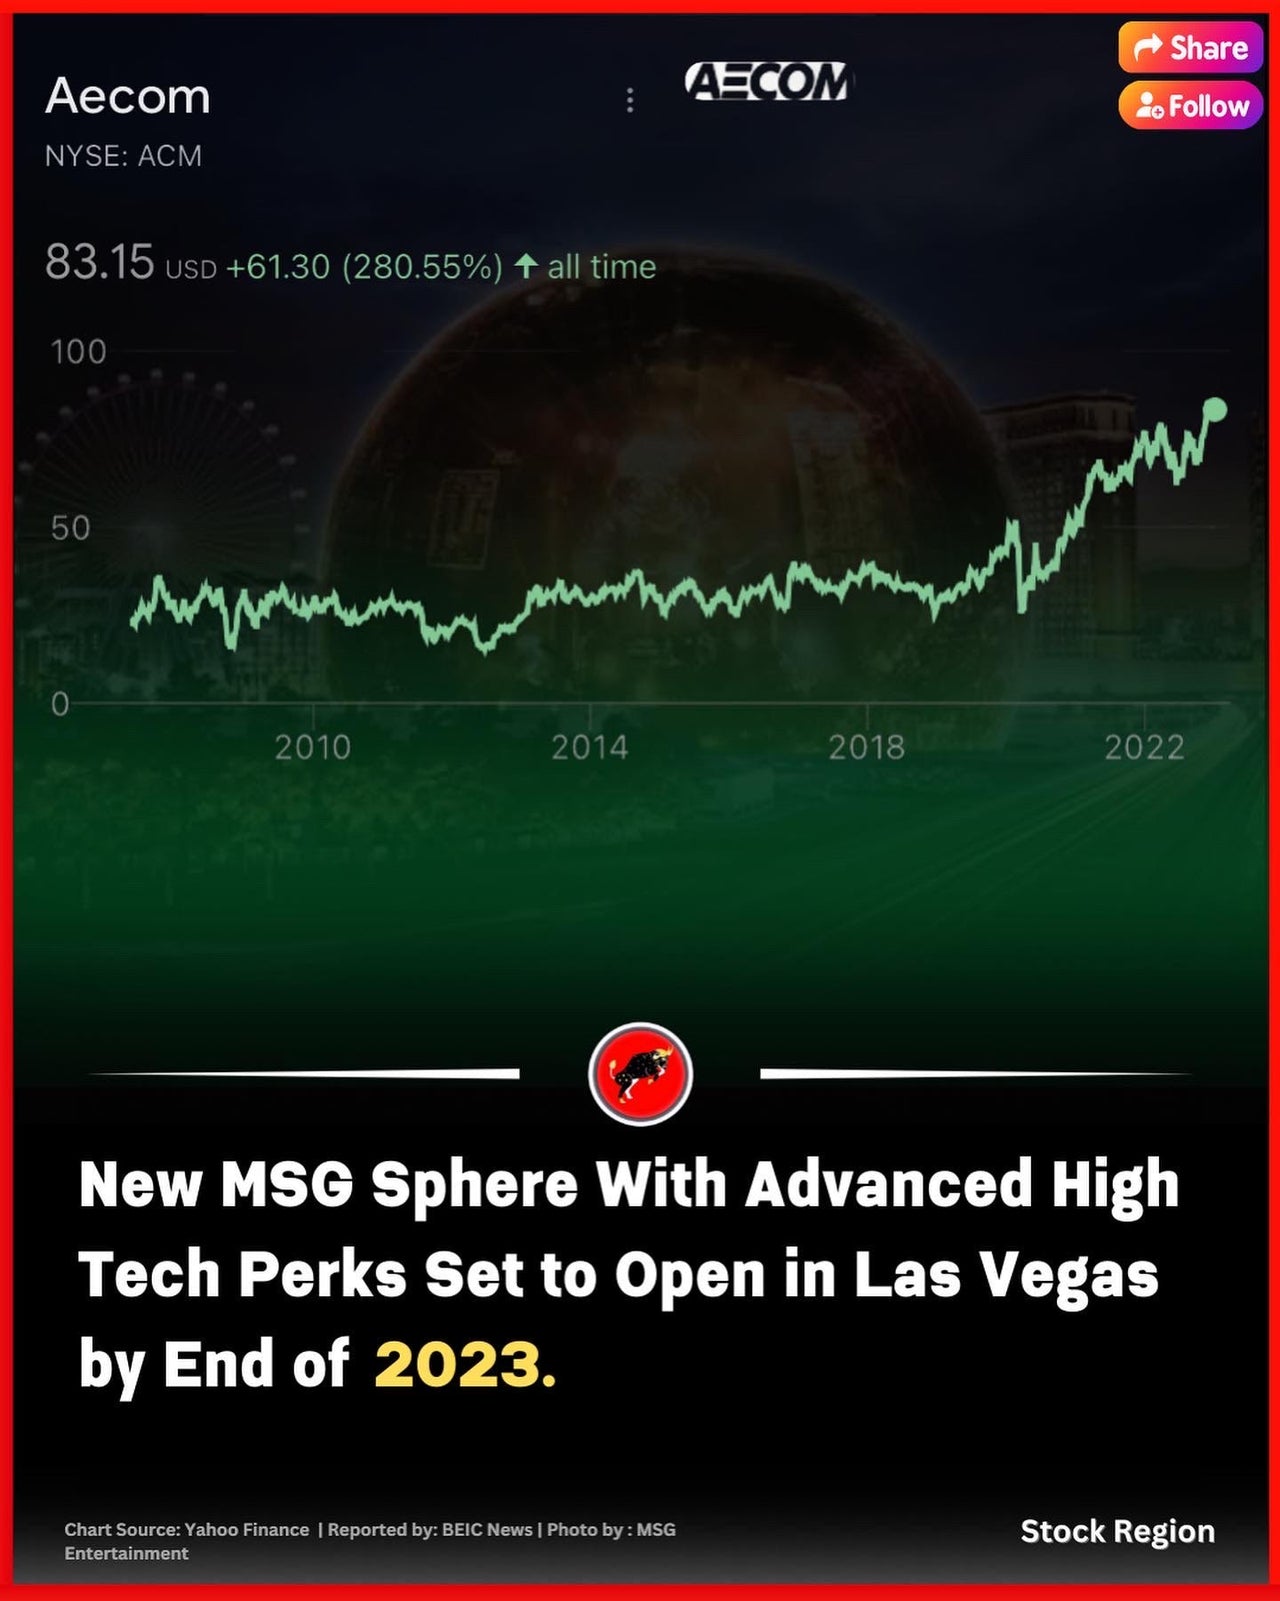 Stock Region: The new MSG Sphere in Las Vegas is set to open by the end of 2023